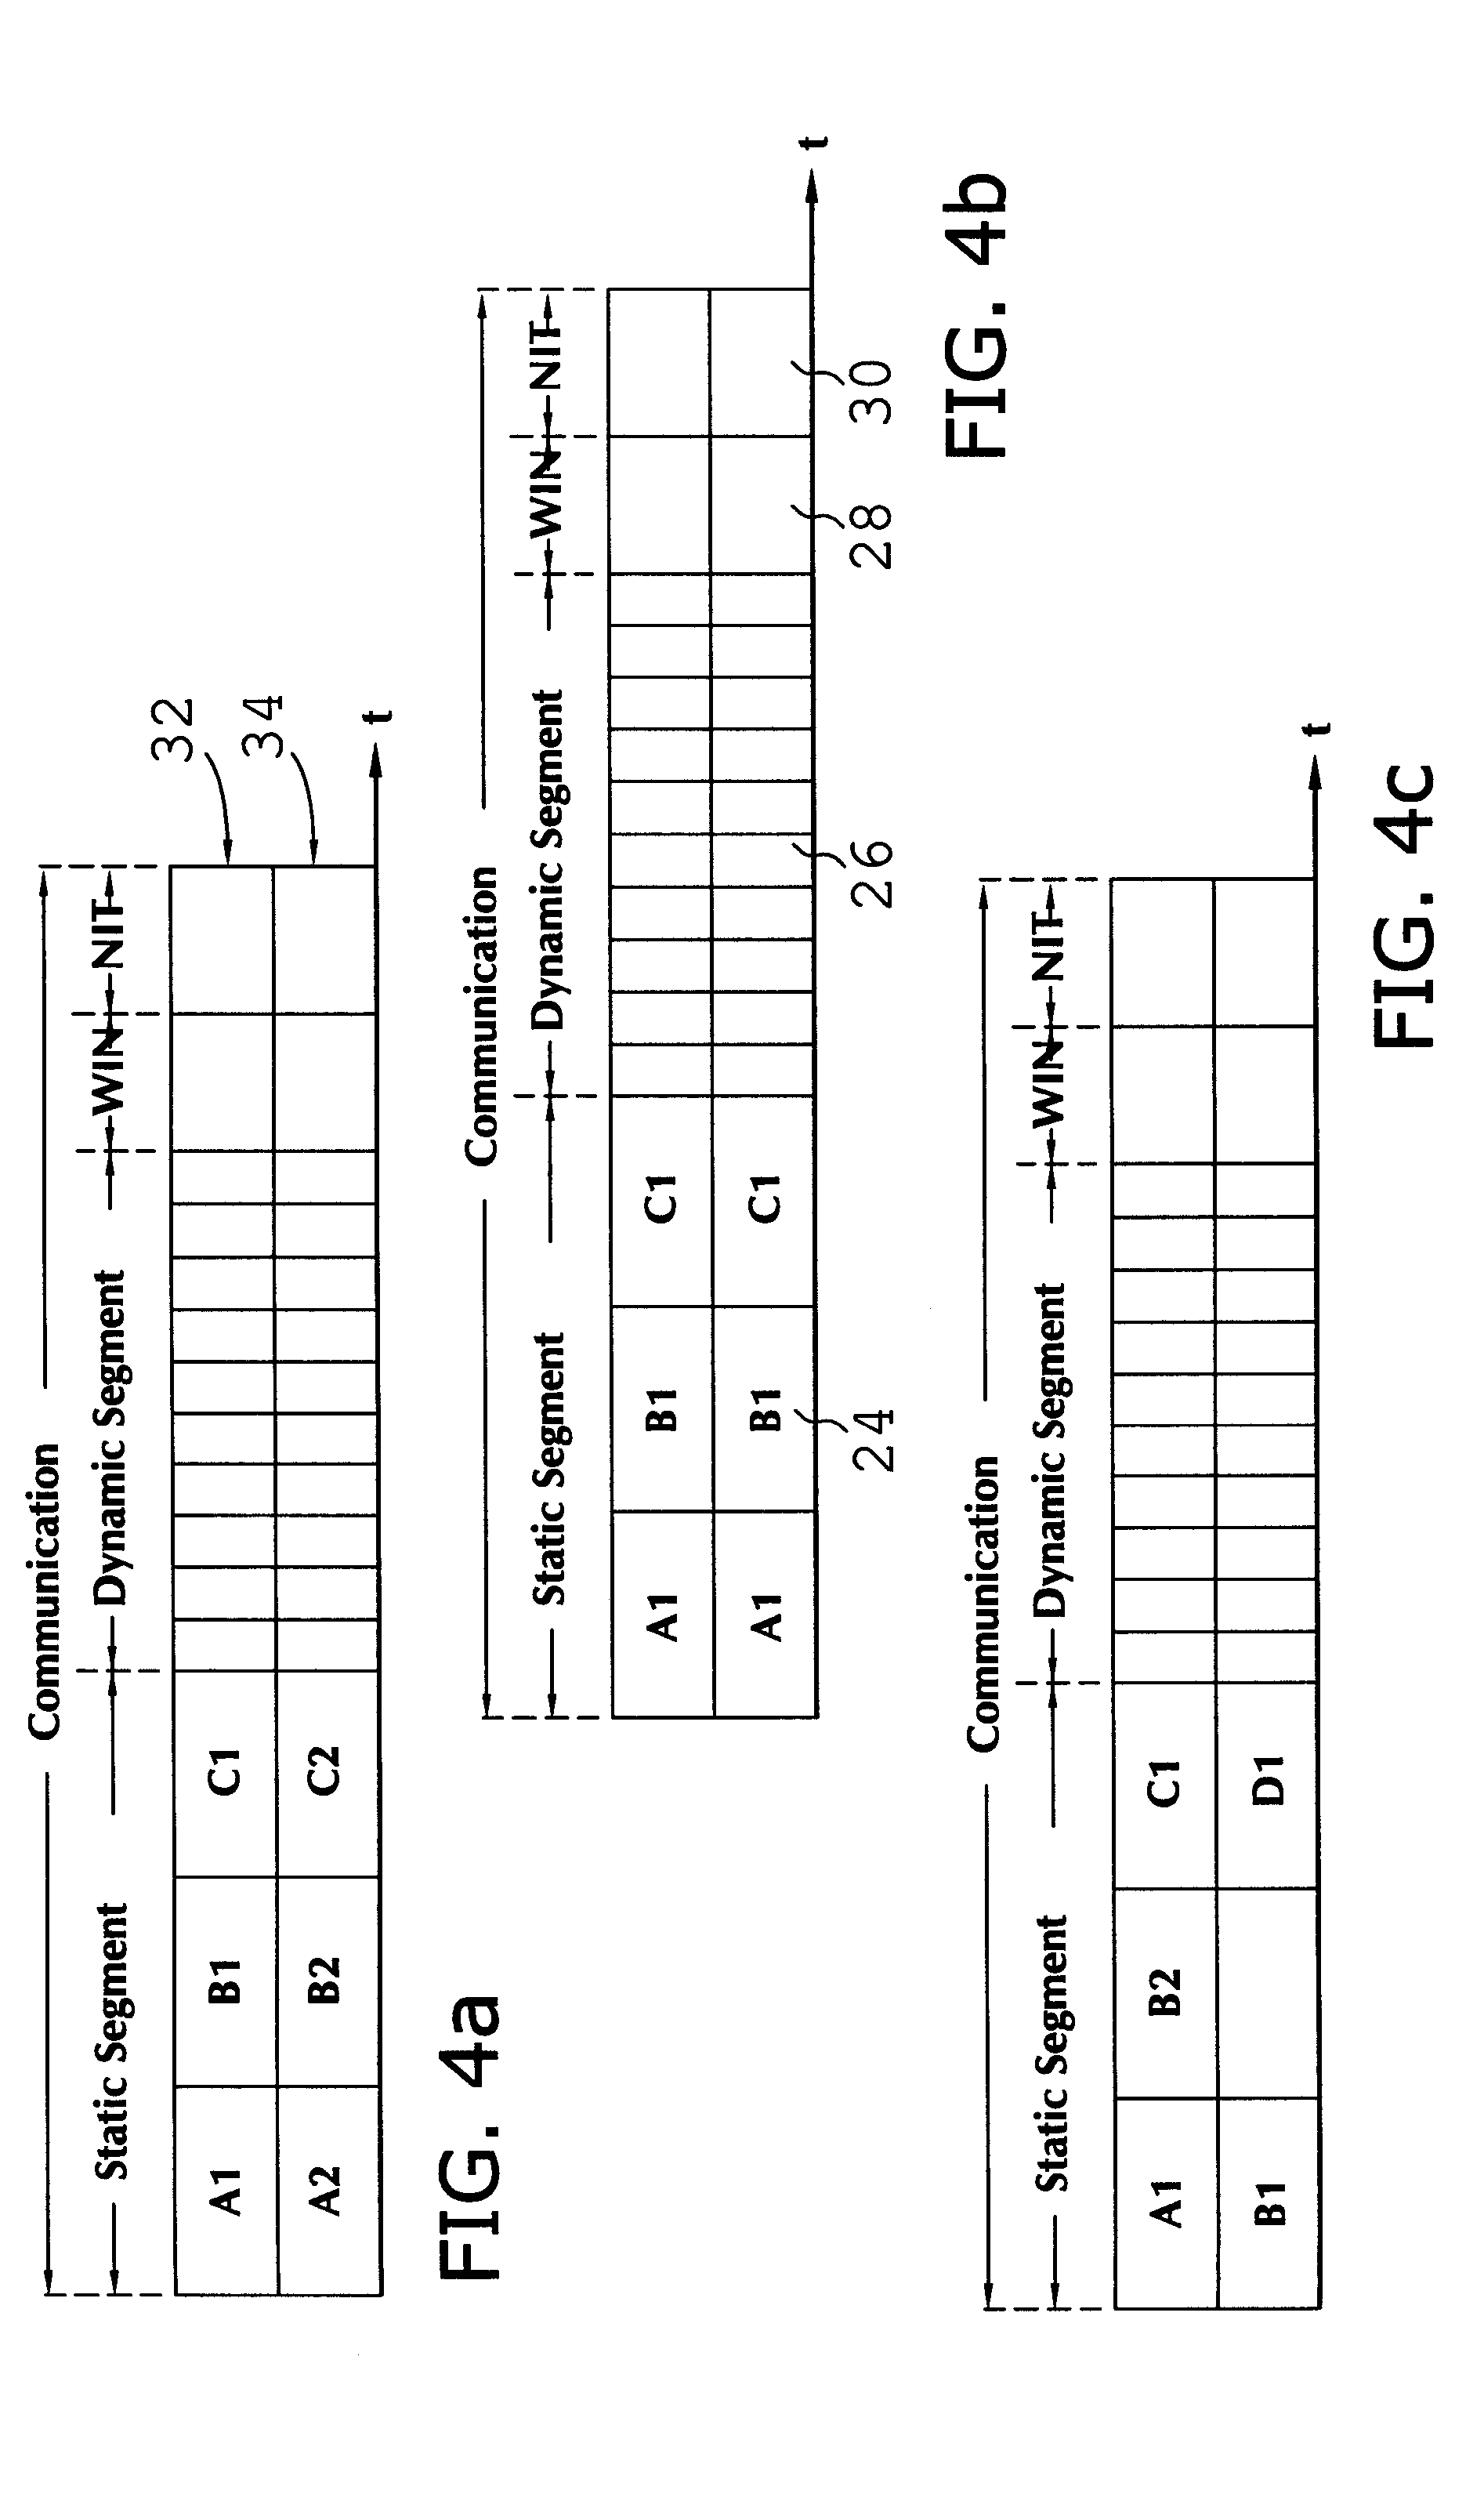 System and Method of Optimizing the Static Segment Schedule and Cycle Length of a Time Triggered Communication Protocol